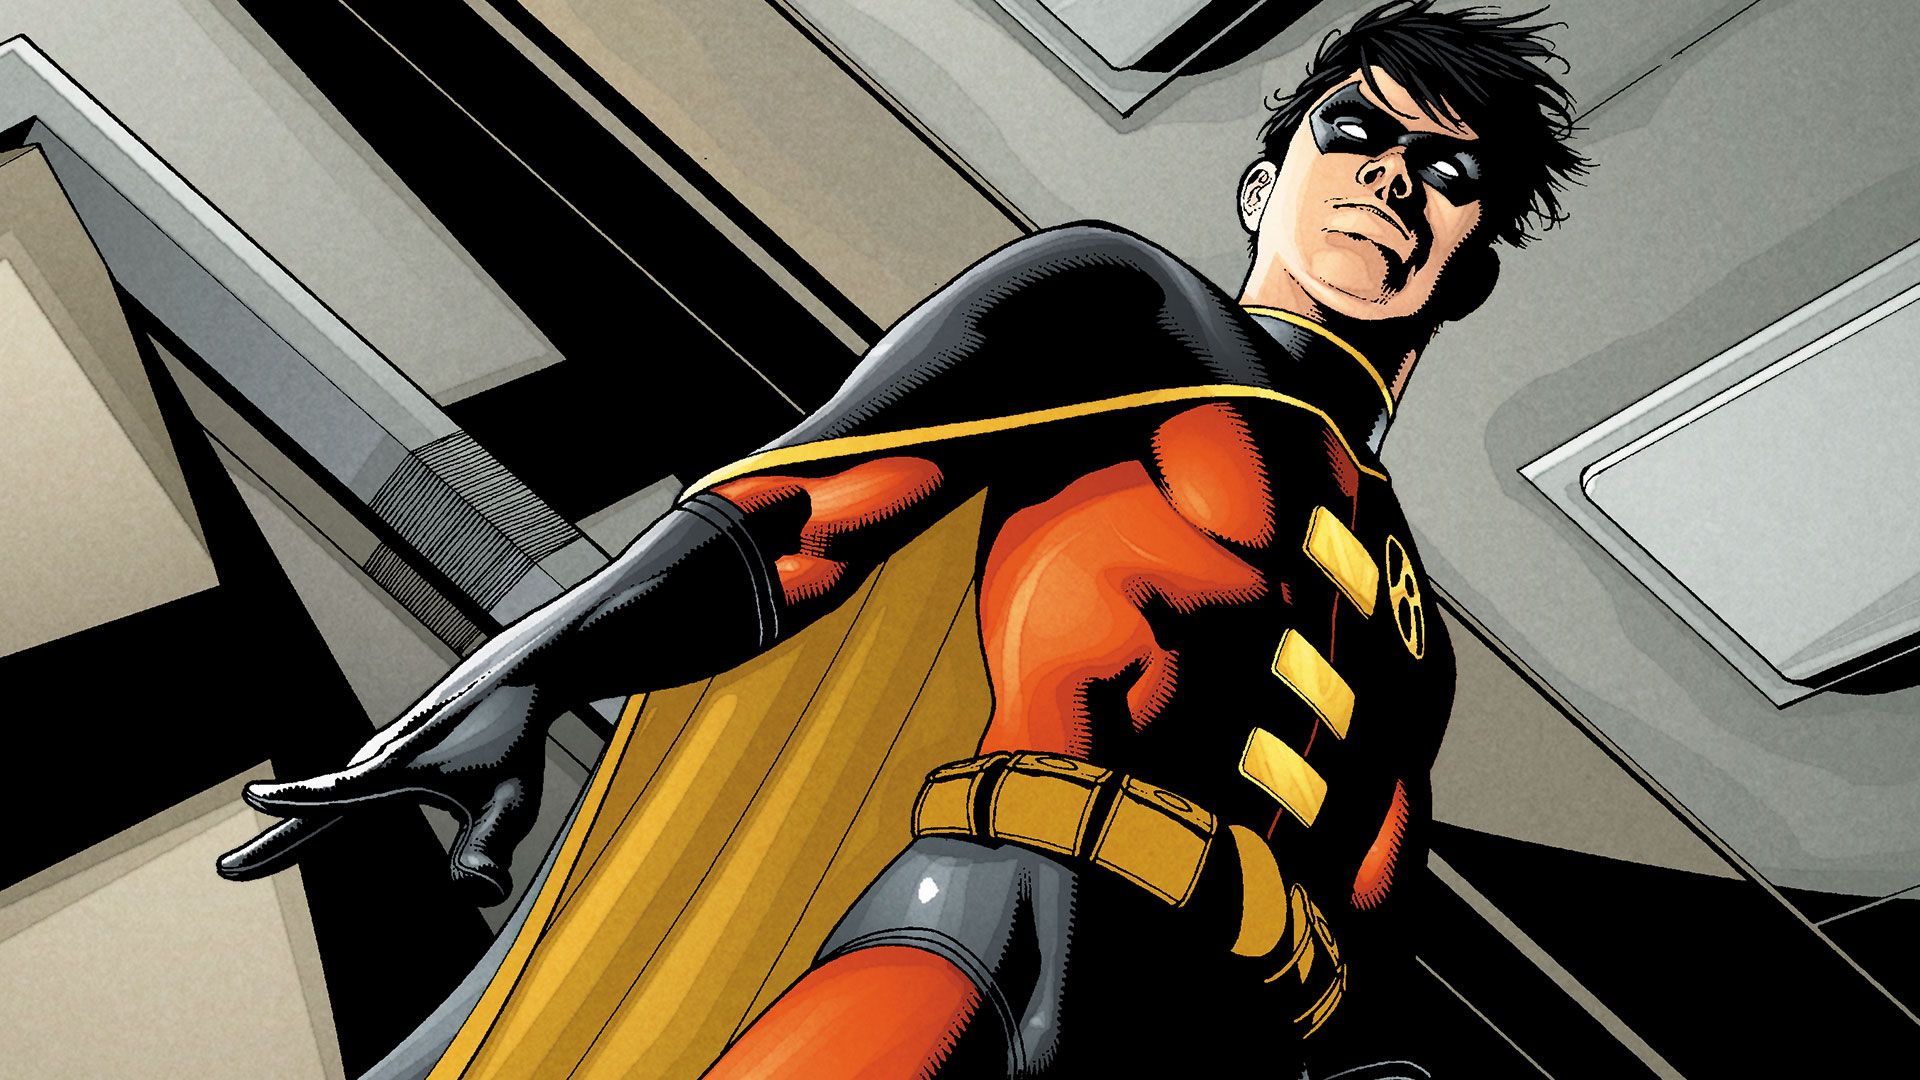 Tim Drake images REd Robin HD wallpaper and background photos